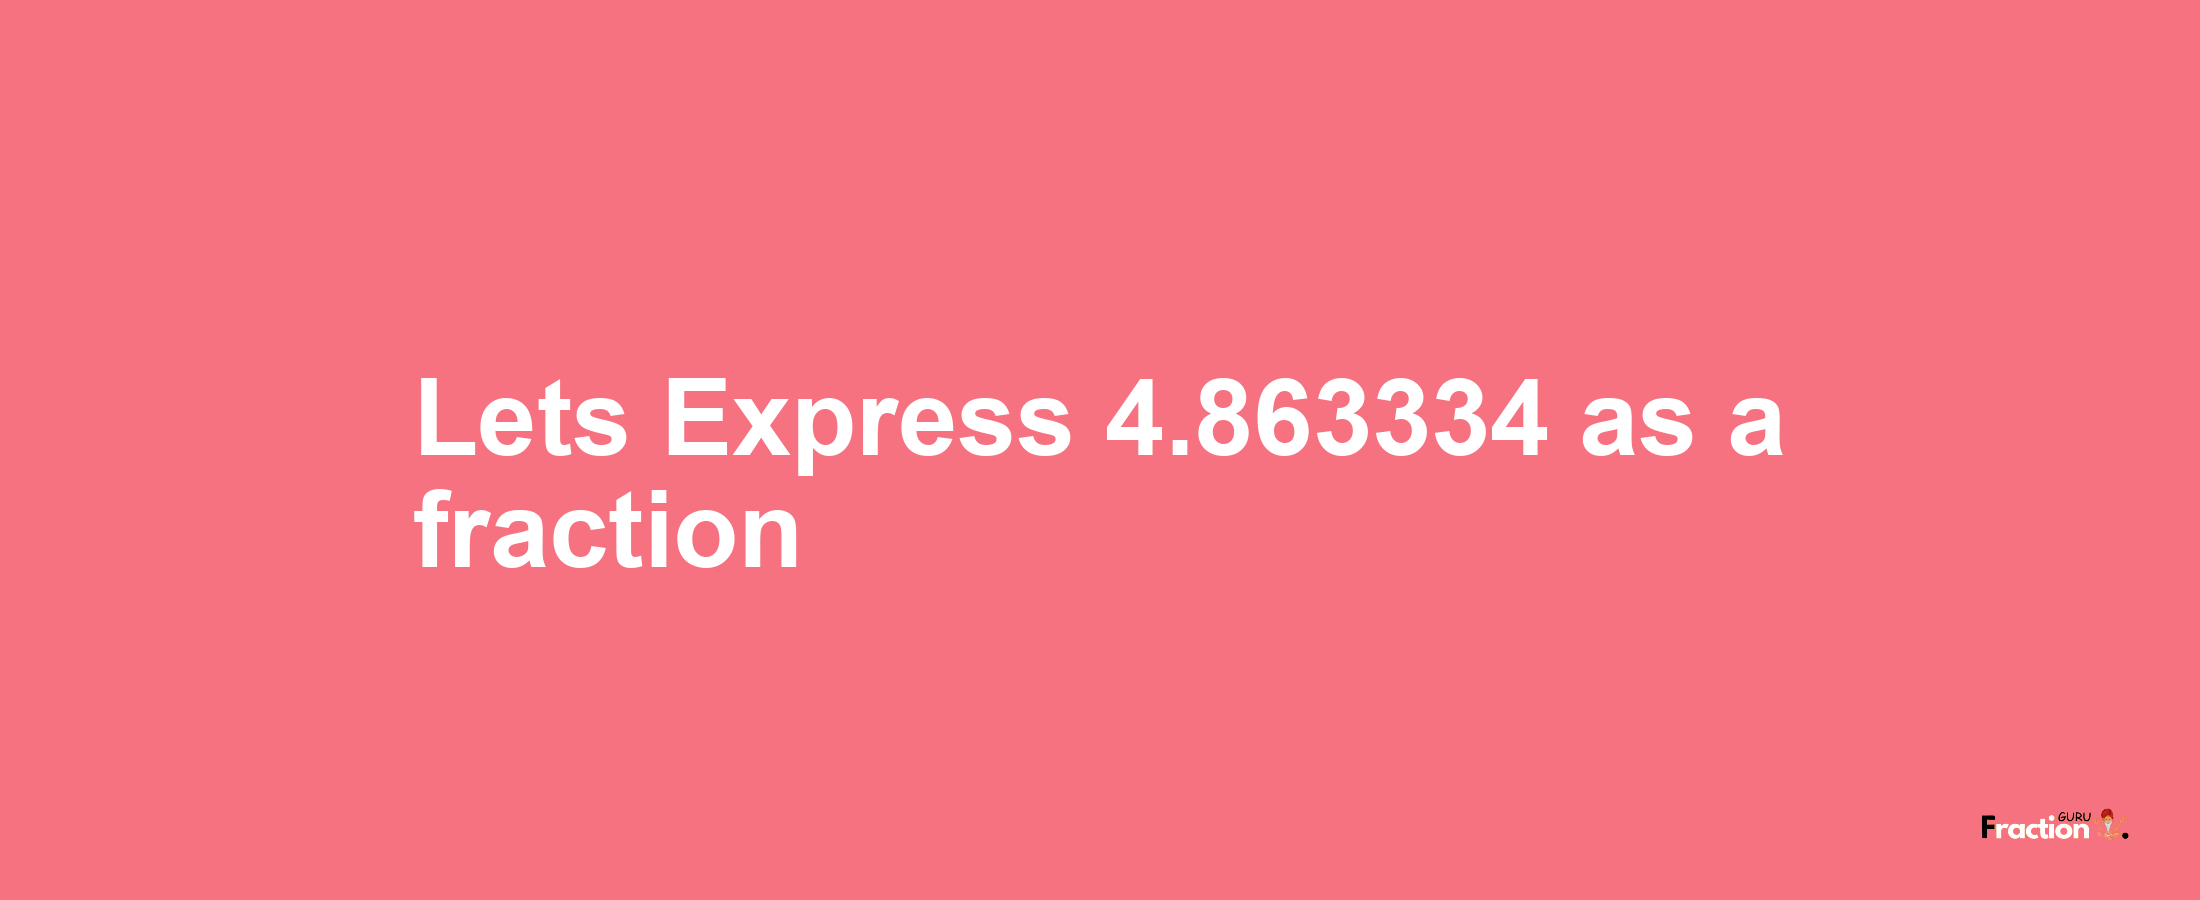 Lets Express 4.863334 as afraction